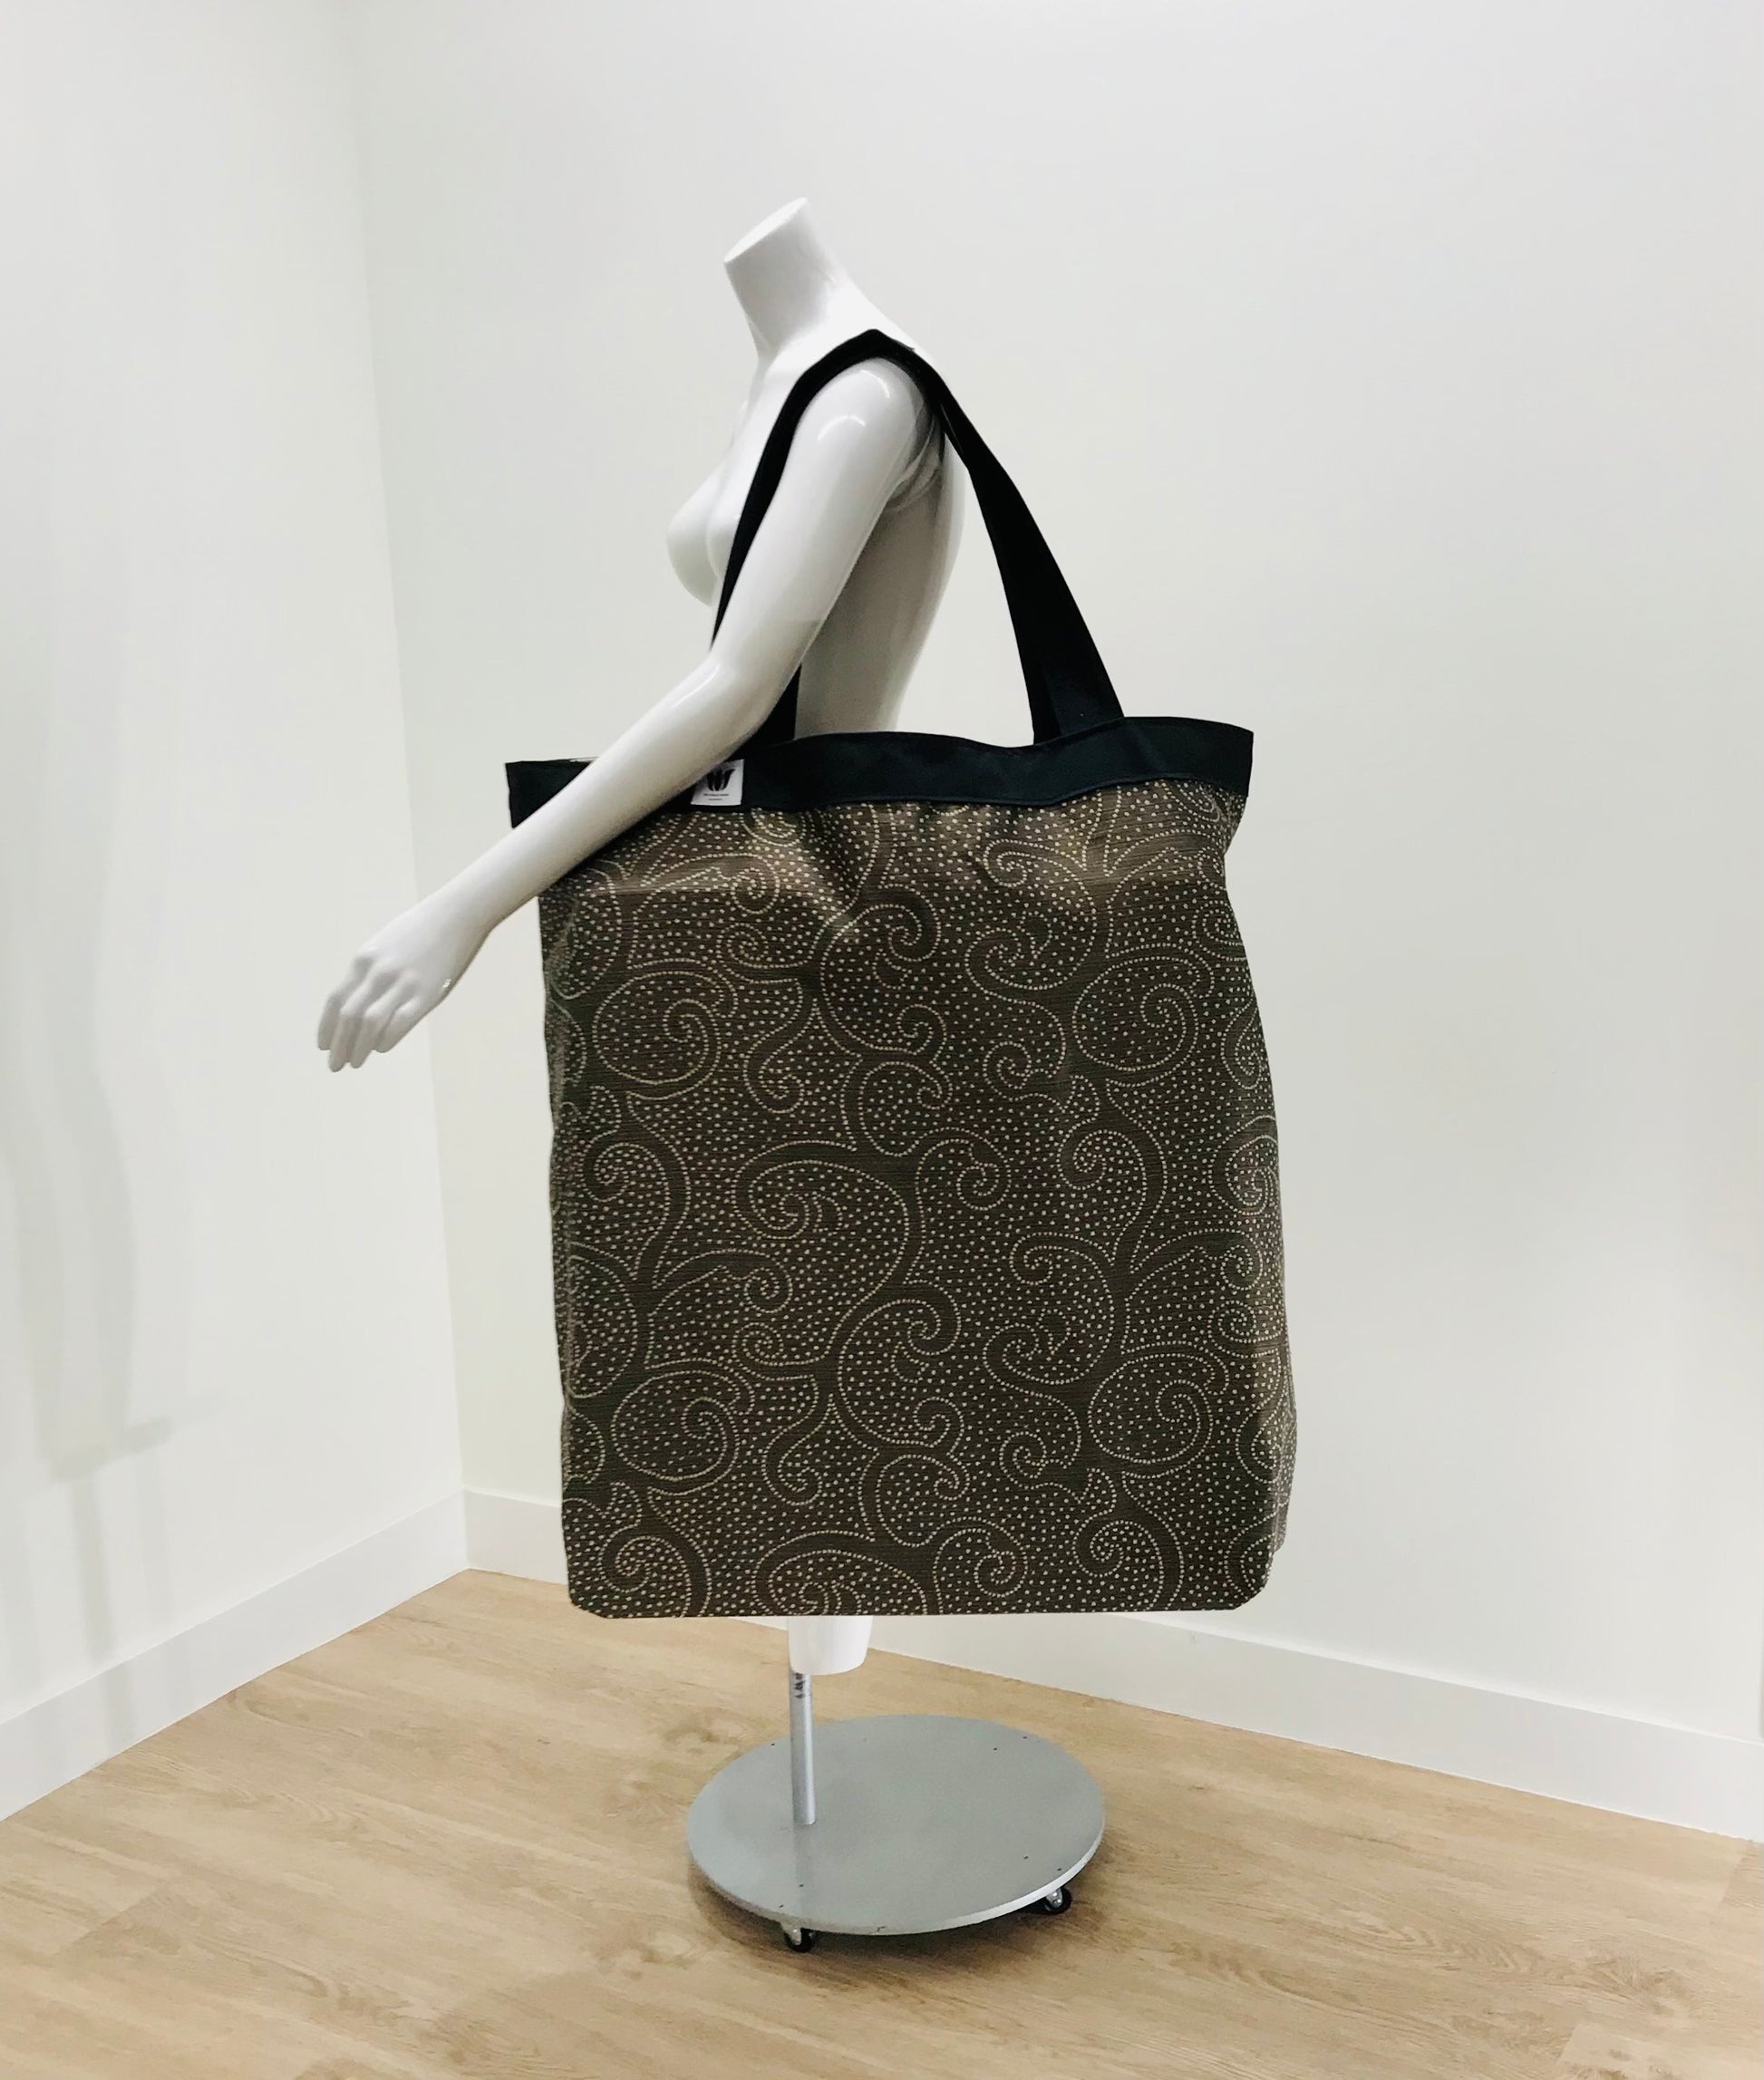 Extra Large Yoga Tote Bag in brown subtle graphic scroll print to carry and or store yoga props for yoga practice. Made in Canada by My Yoga Room Elements